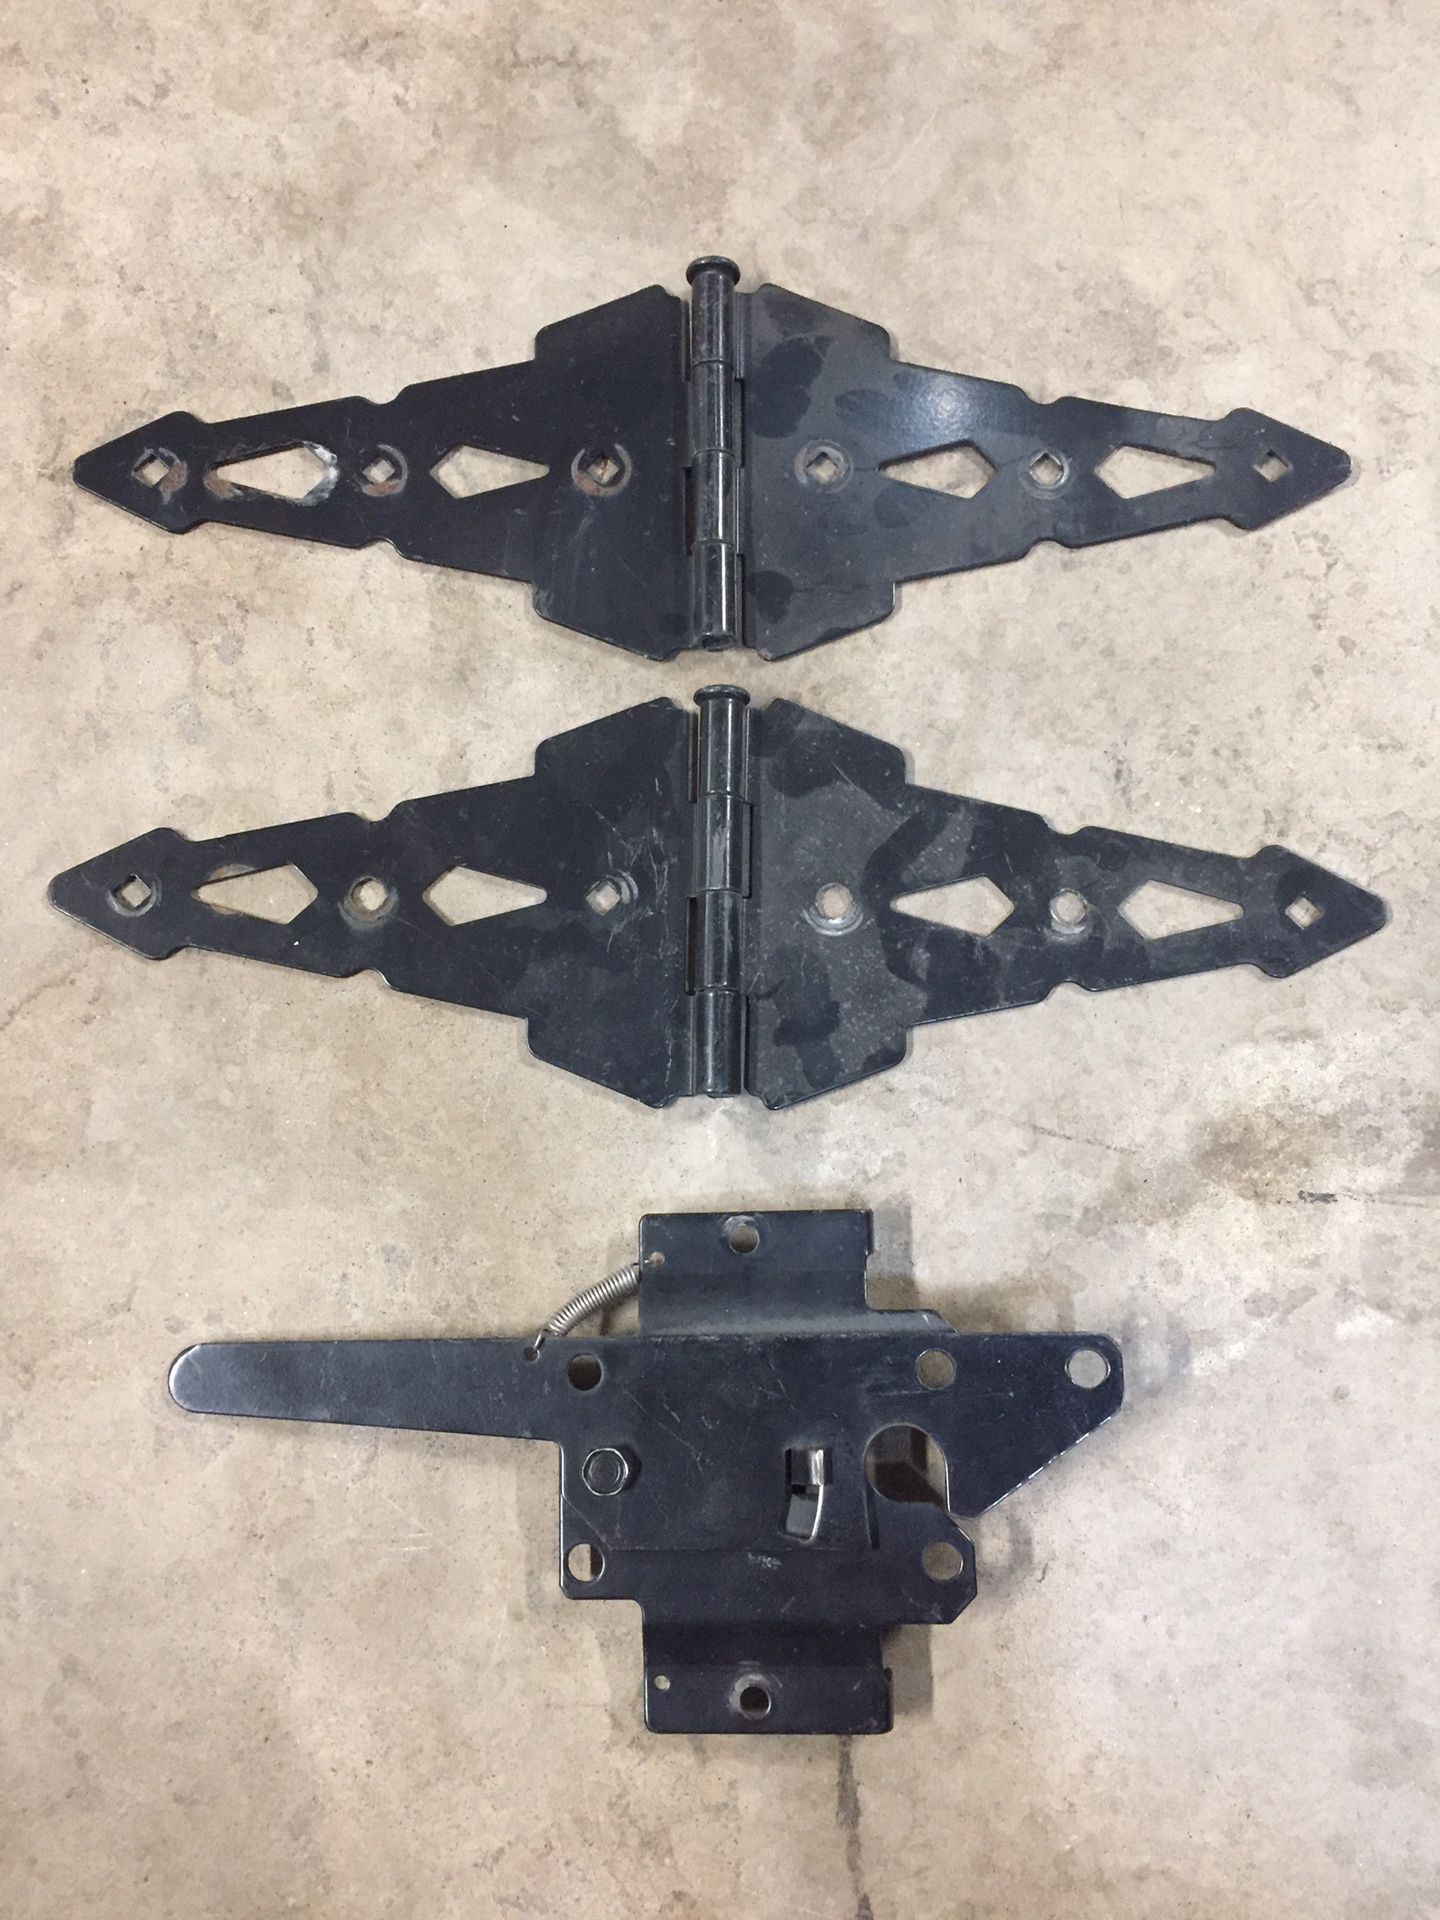 8” gate hinges and latch